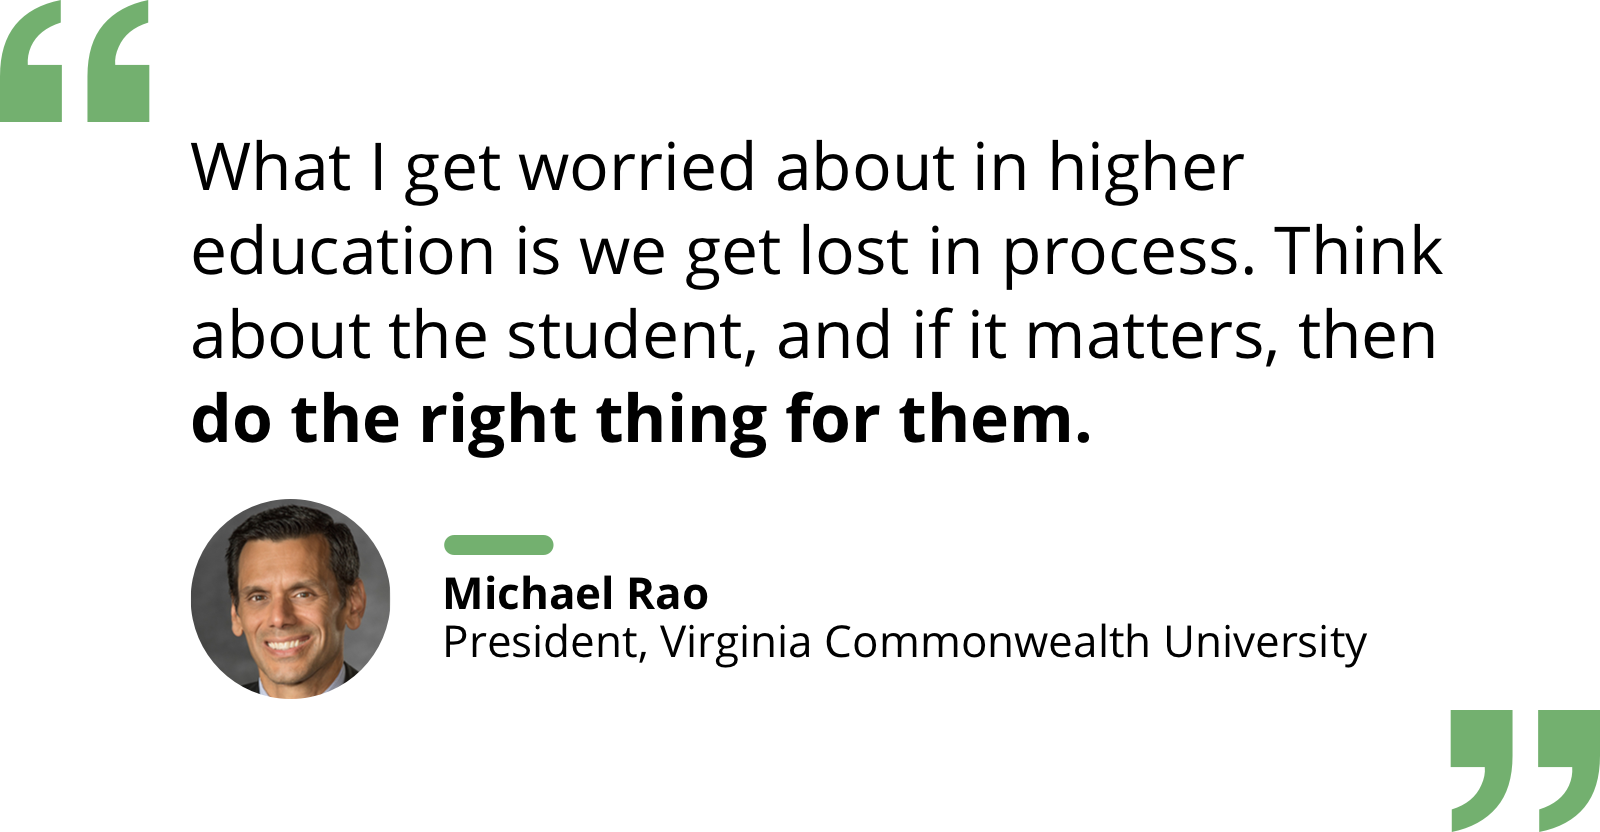 Quote by Michael Rao re: not getting lost in process, but doing what is right for the student.